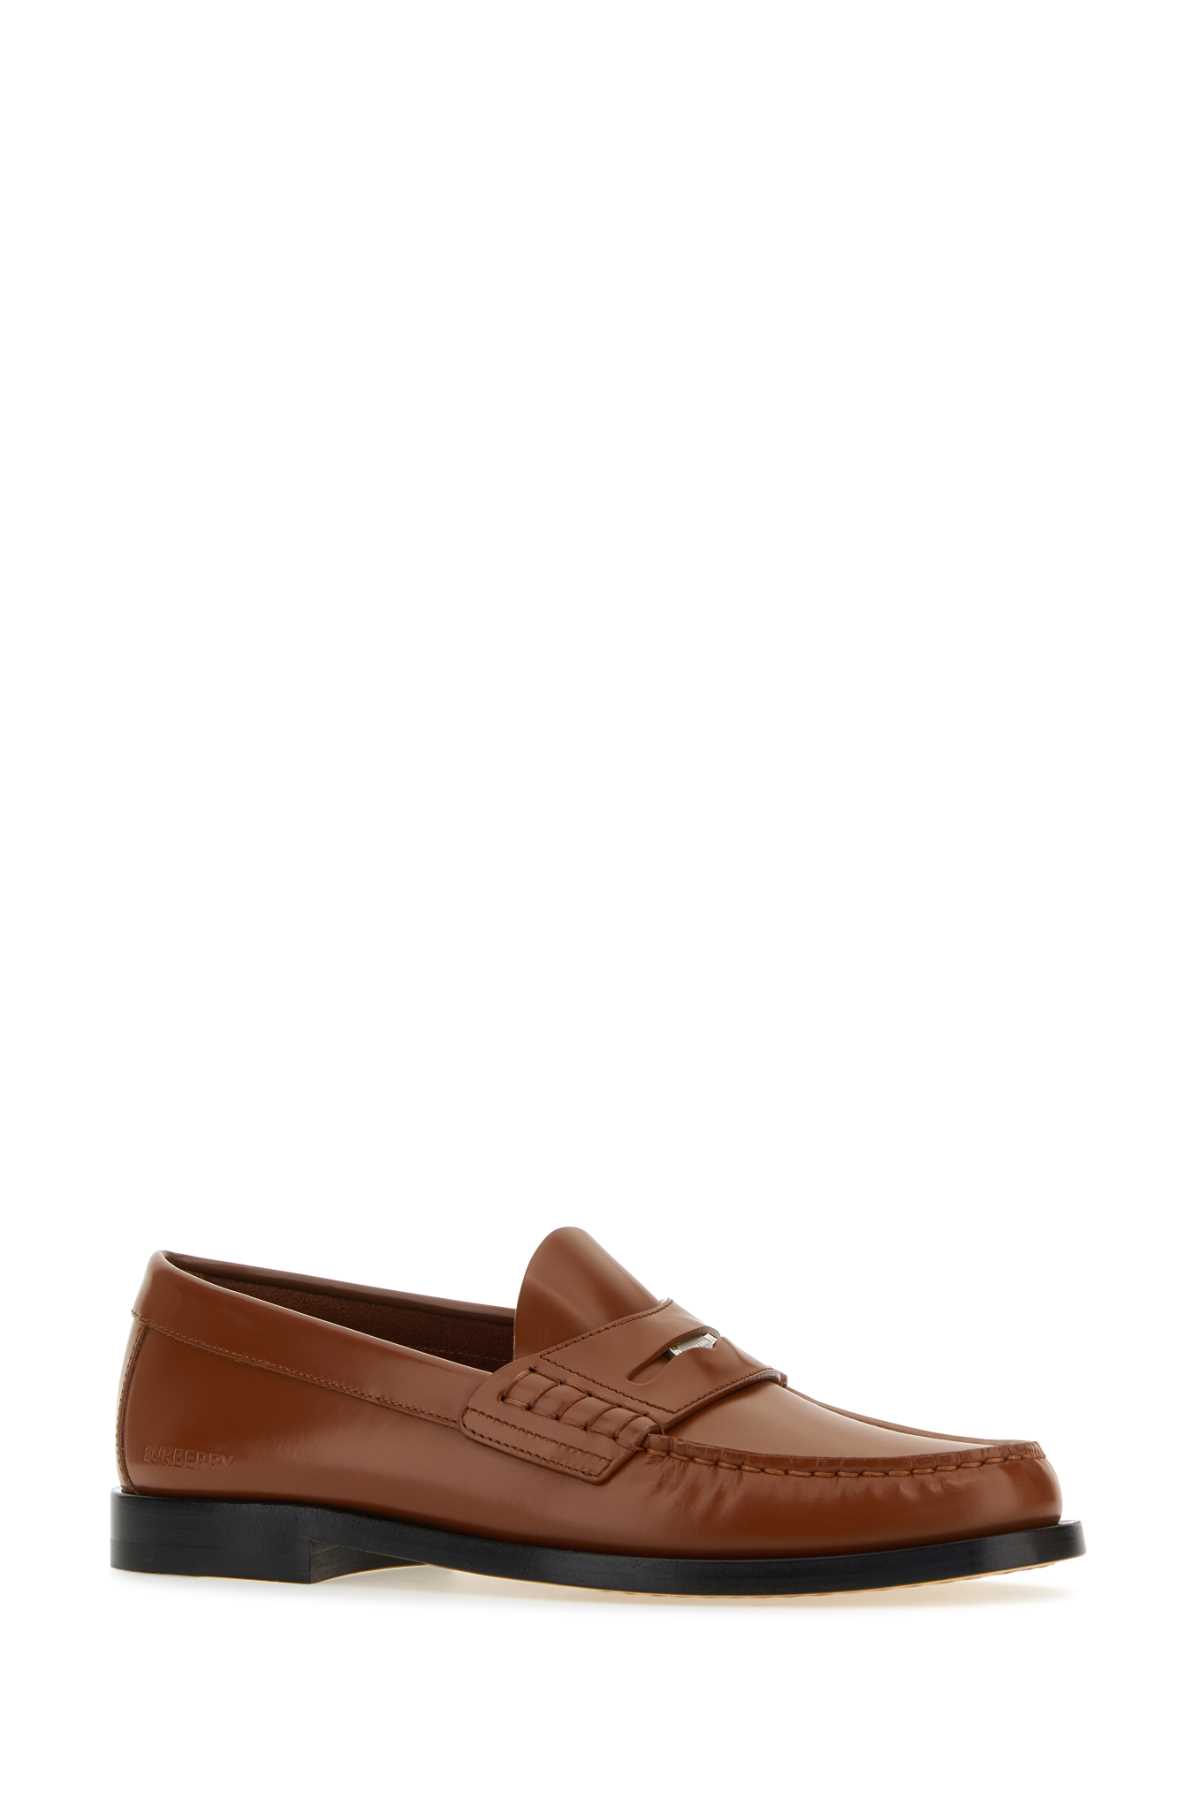 Burberry Brown Leather Loafers In Warmoakbrown